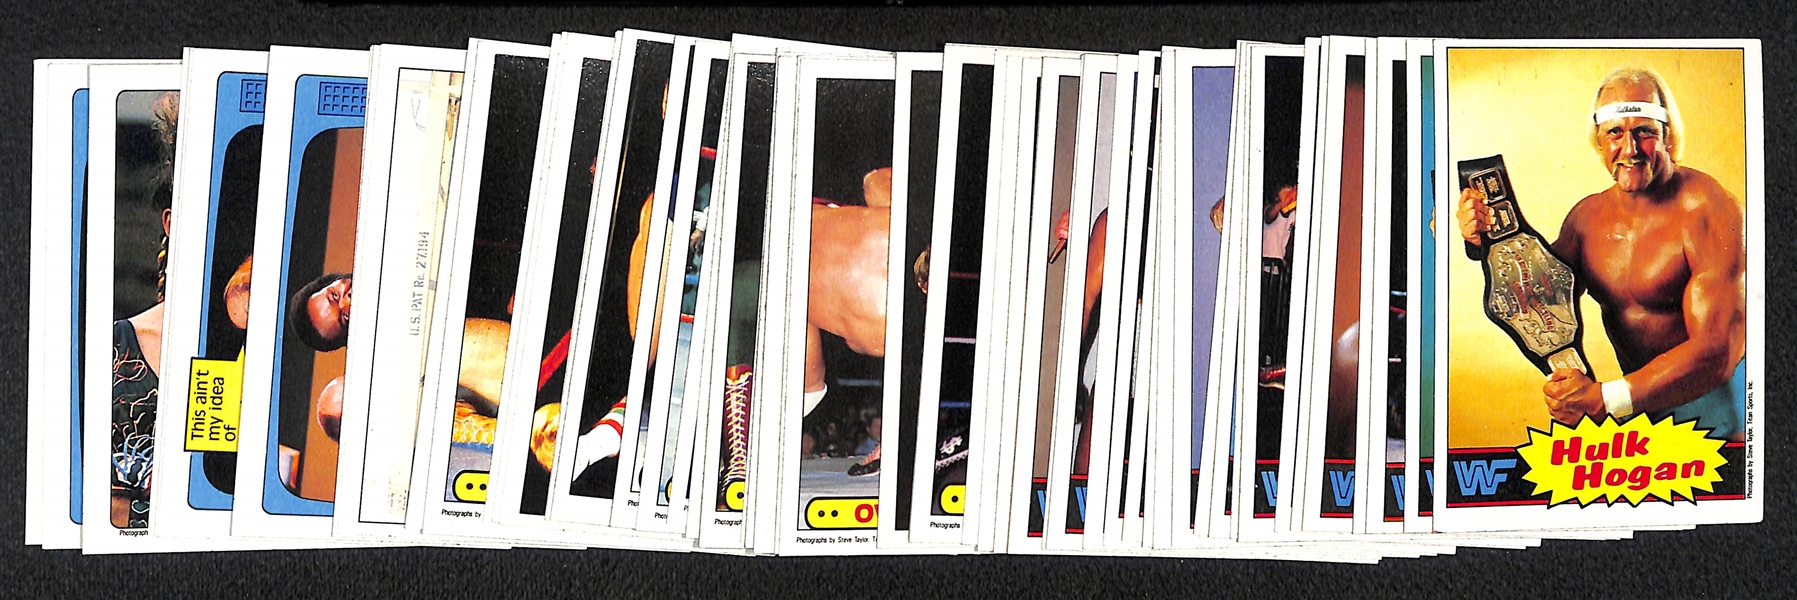 1985 Topps WWF Complete Card Set of 66 Cards w. Hulk Hogan Rookie Cards #1 & #16